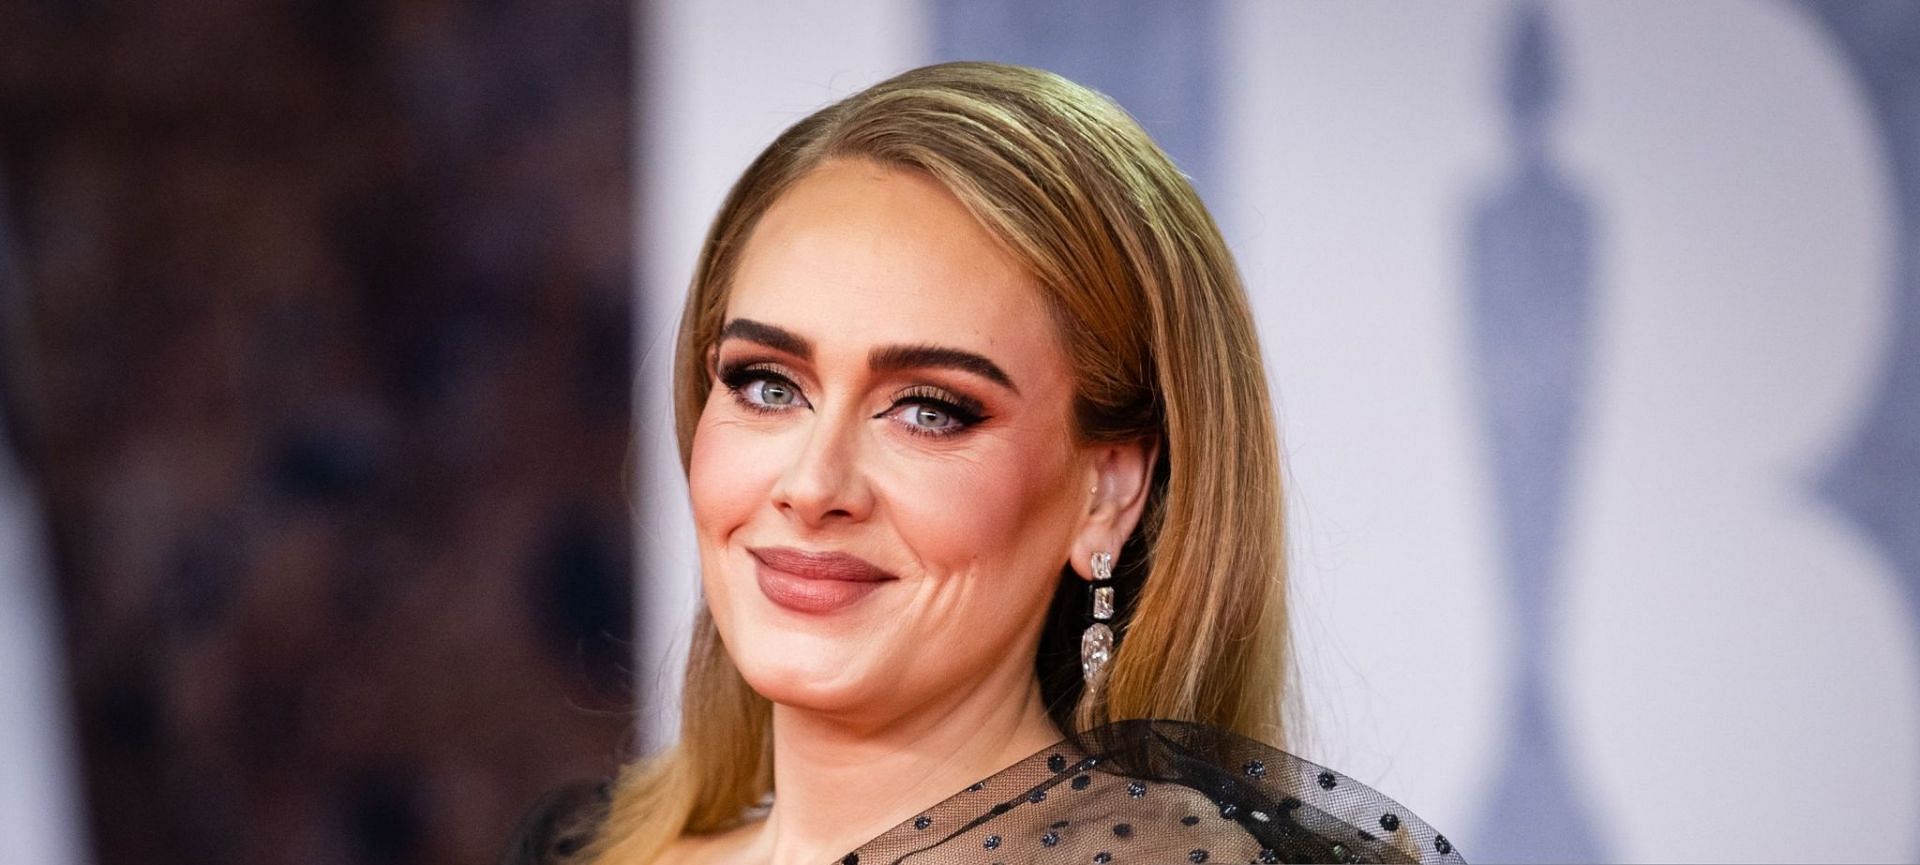 Adele sparked a transphobic debate after saying she was proud of being a woman during gender-neutral Artist of the Year win at the BRITs (Image via Samir Hussein/WireImage)